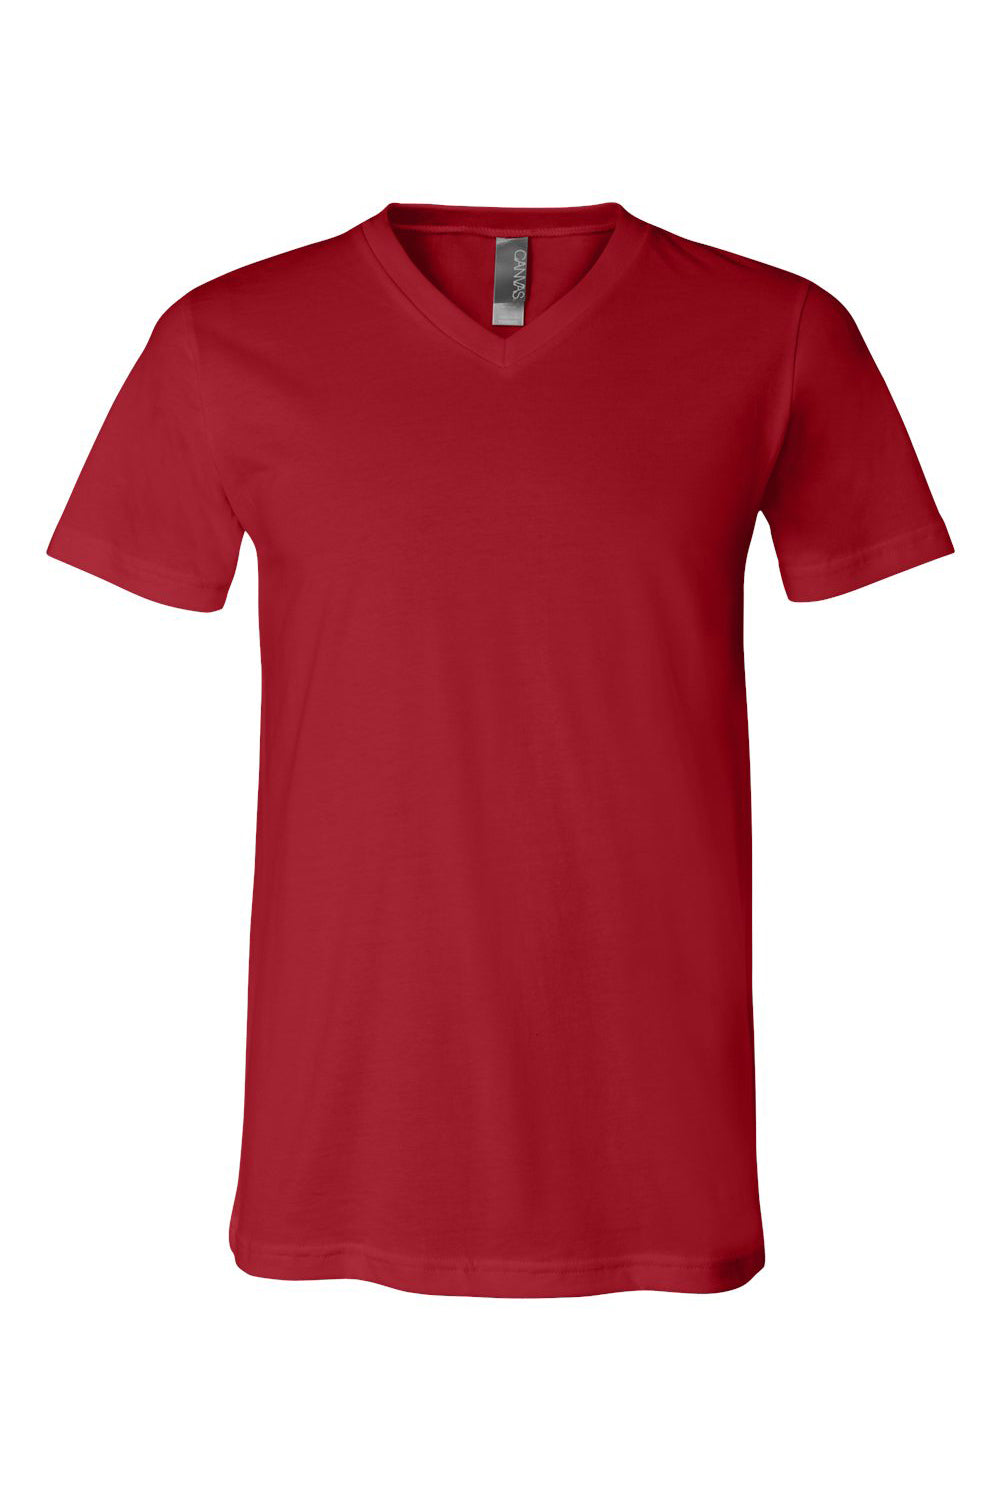 Bella + Canvas BC3005/3005/3655C Mens Jersey Short Sleeve V-Neck T-Shirt Canvas Red Flat Front